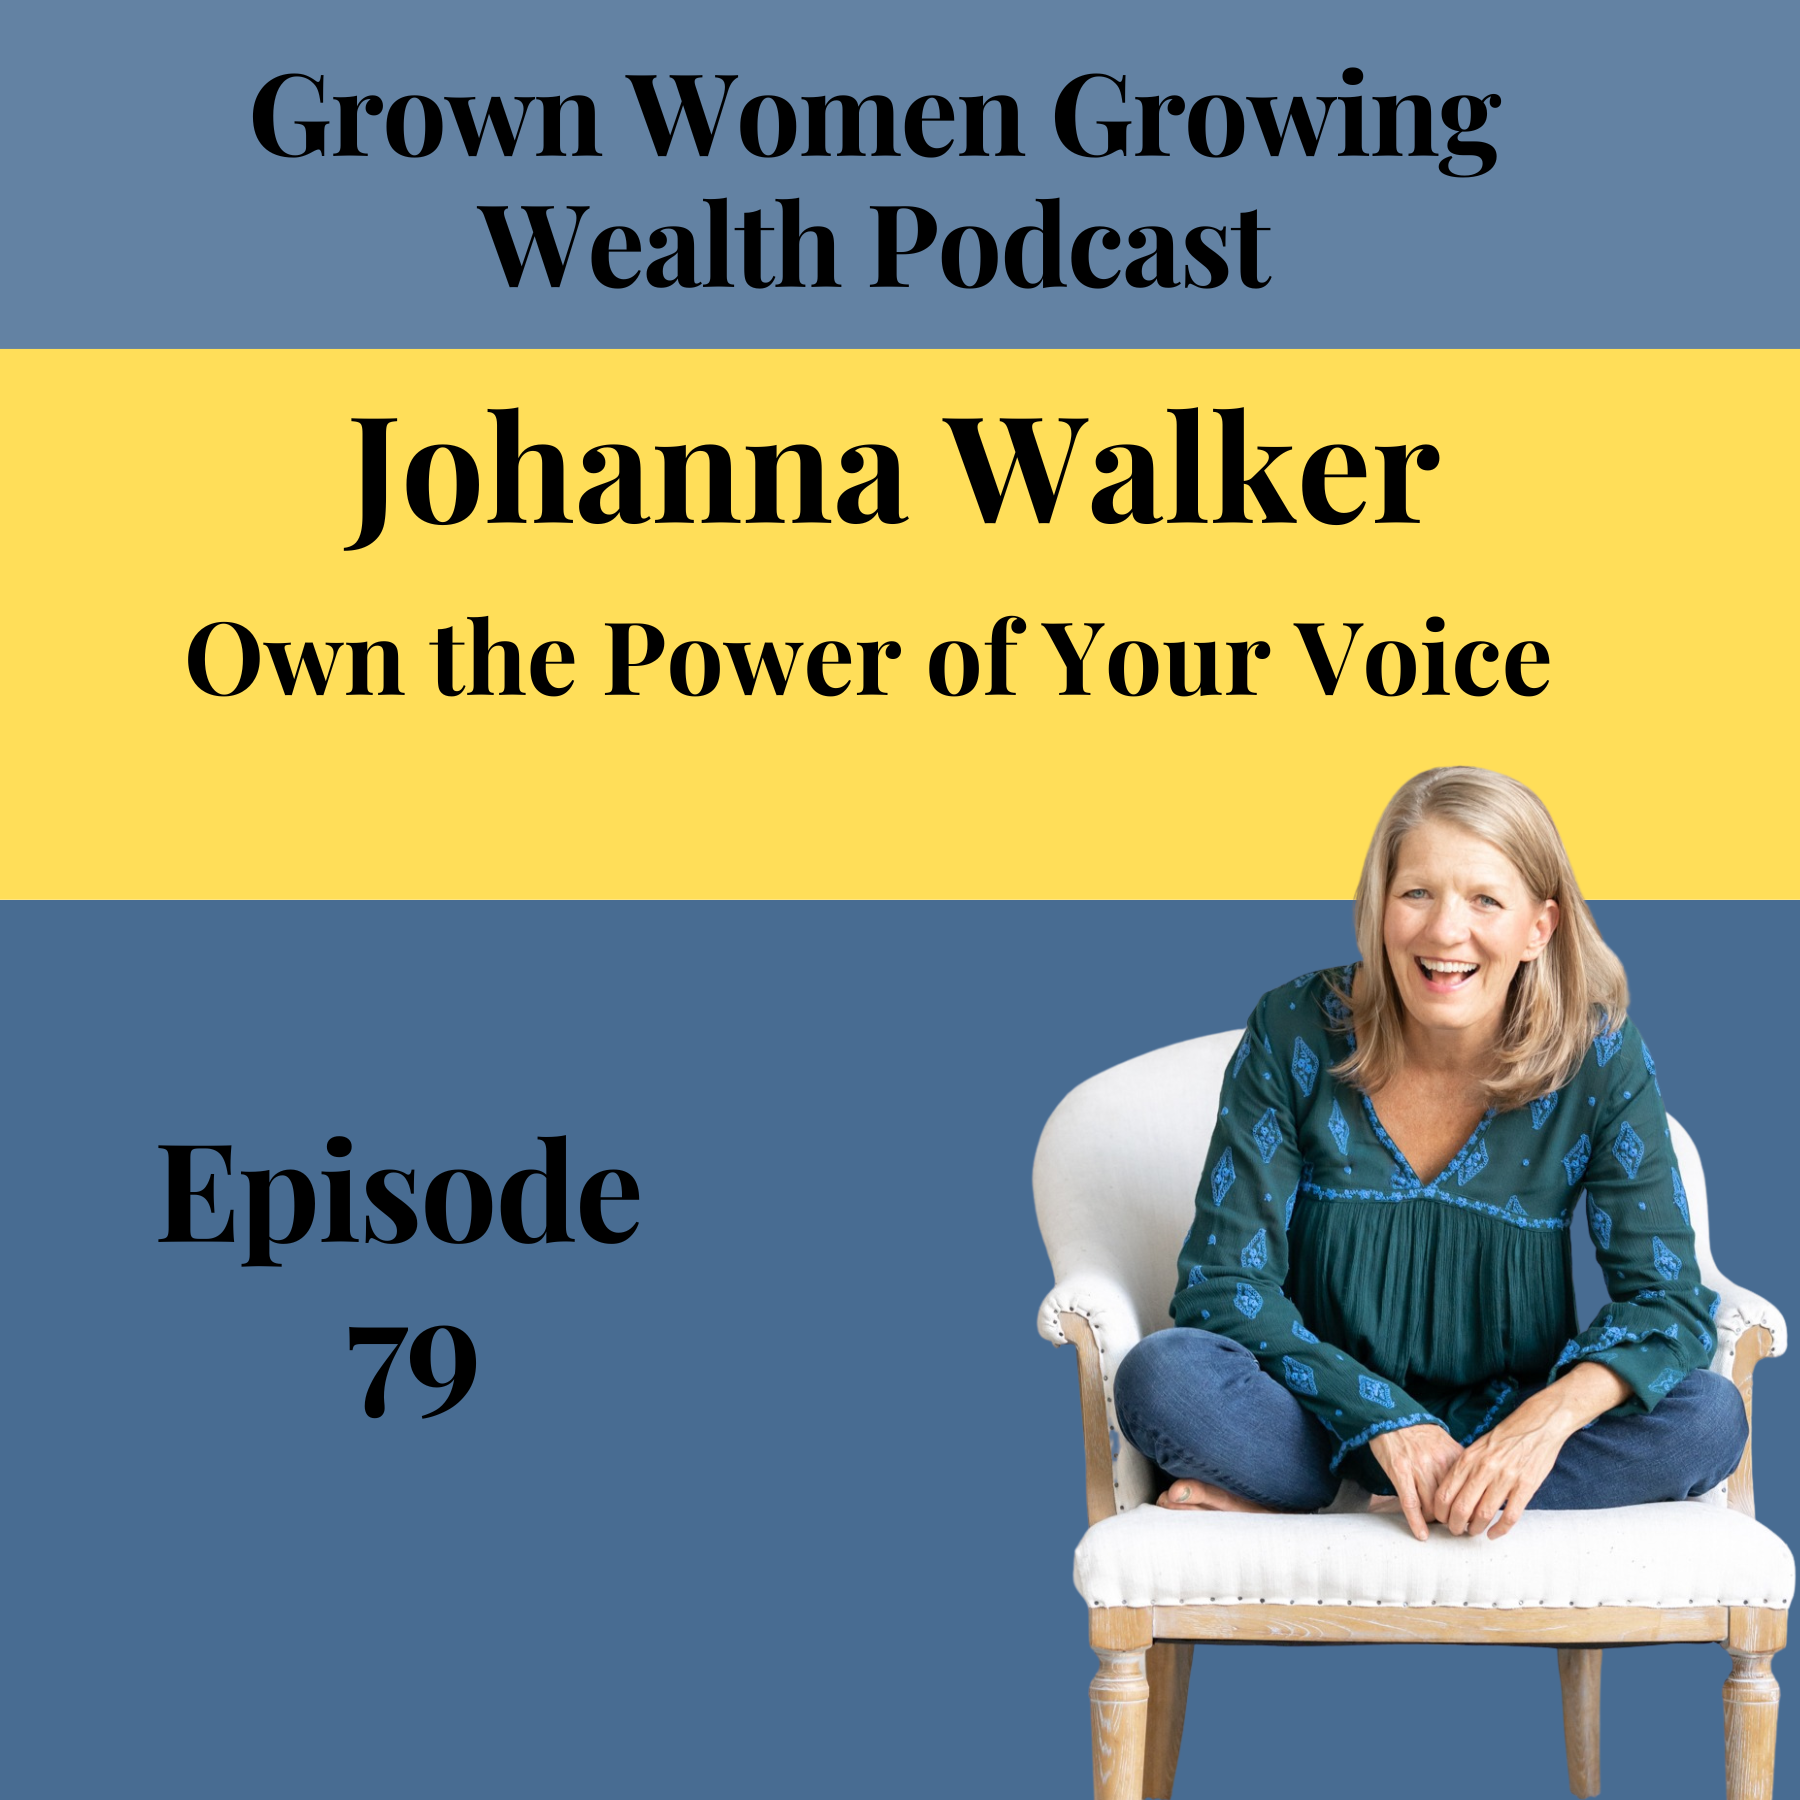 Ep 79 Own the Power of Your Voice w Johanna Walker Image